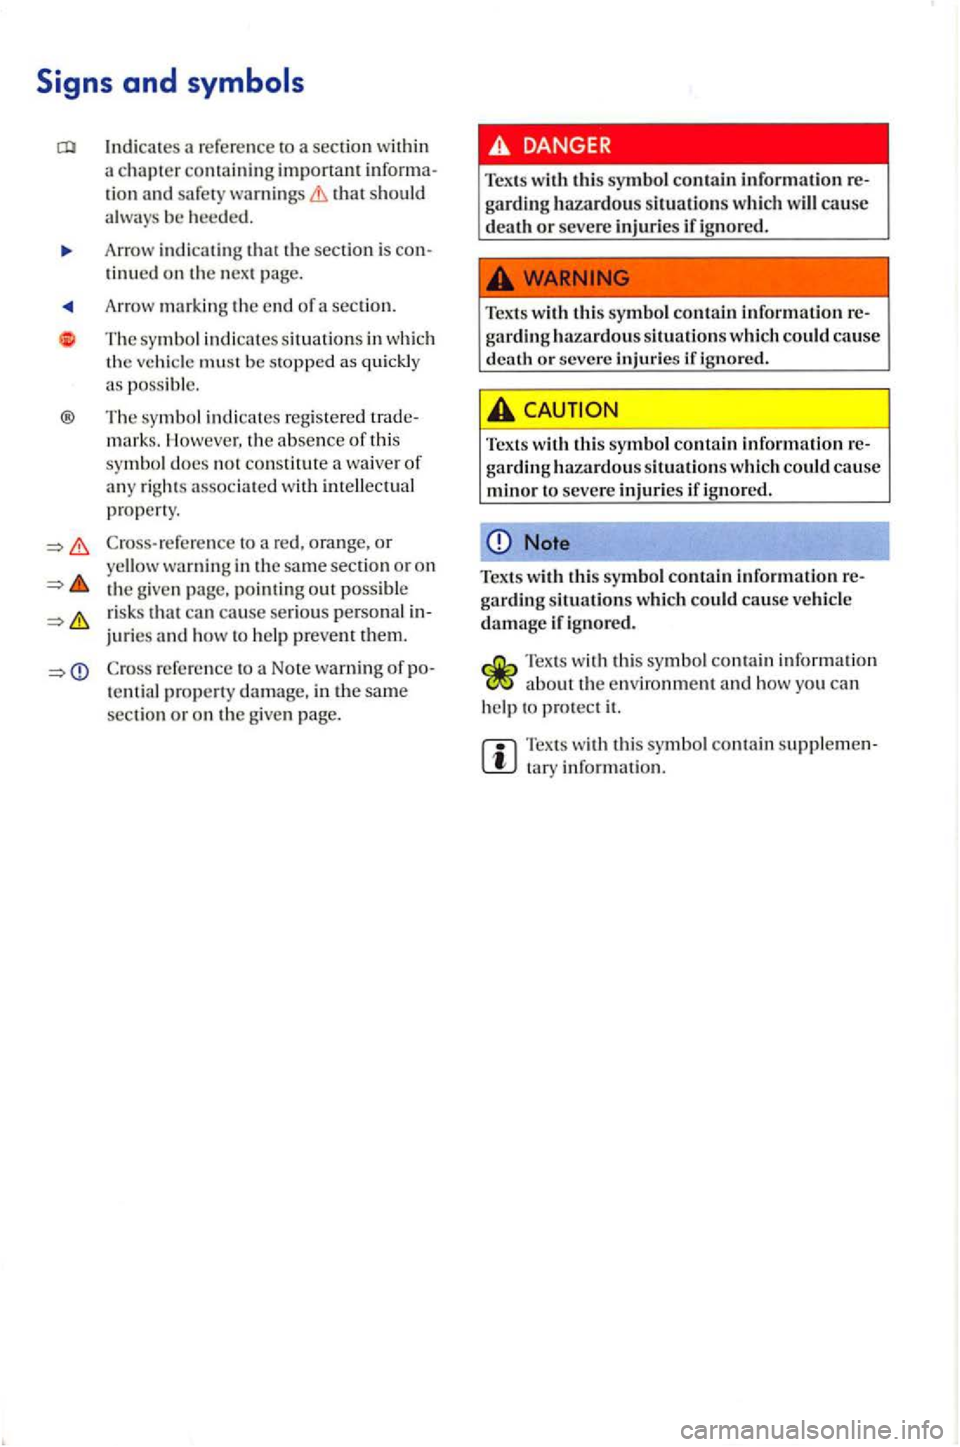 VOLKSWAGEN GOLF PLUS 2006  Owners Manual Indicates a  re fe rence  to  a section within a chapter c ontaining important tion and safe ty warnings that should a lways be heeded. 
Arrow  indicating that the section is tinued on th e nex t page